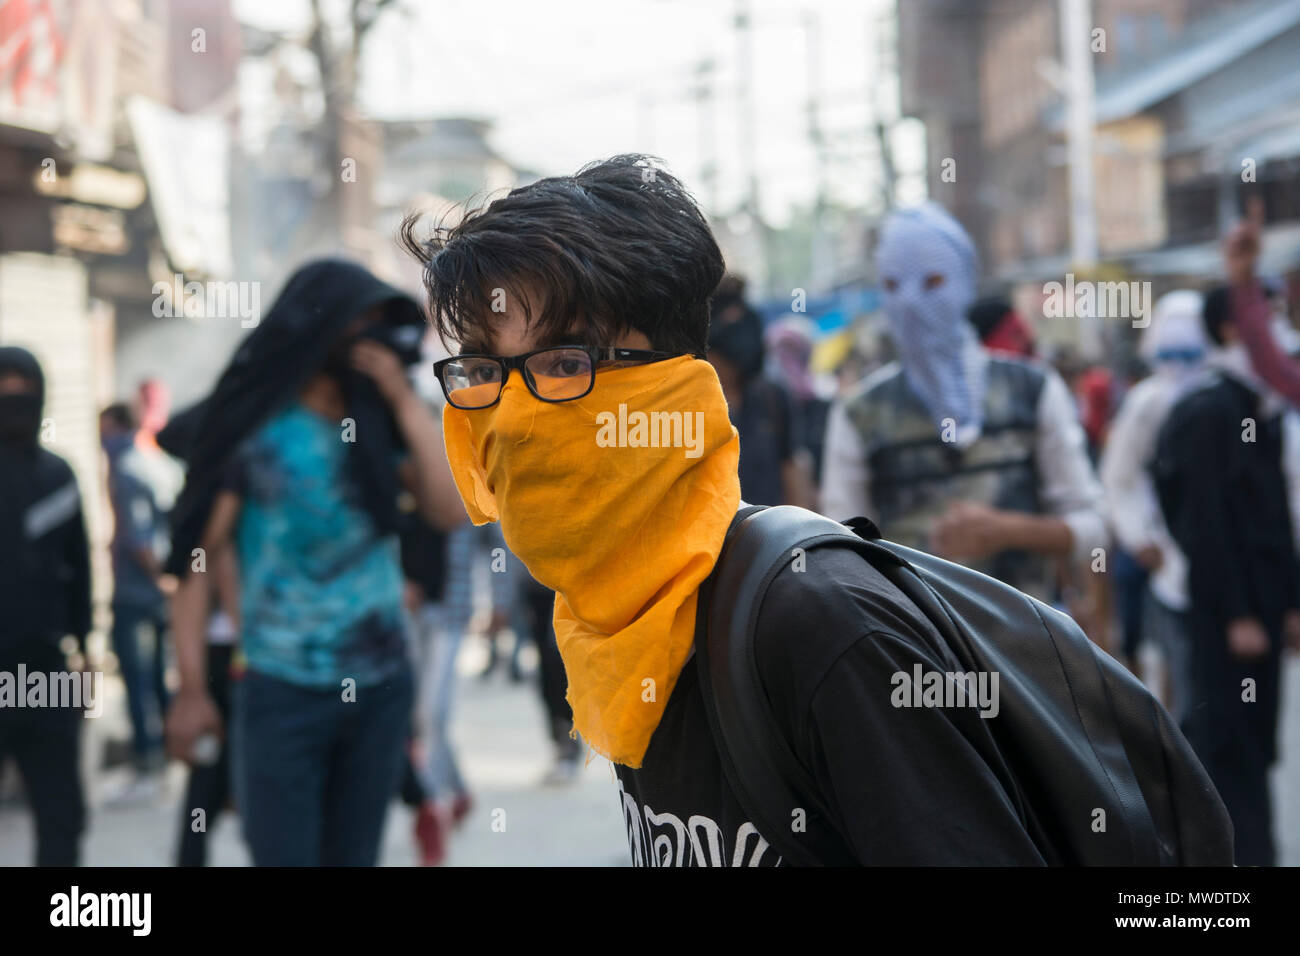 A masked protestor stands during the clashes in Srinagar. As hundreds of people held peaceful protest soon after the congregational prayers at the Jamia Masjid (Grand mosque), in Srinagar. Heavy clashes broke out when the speedy central reserve paramilitary force’s (CRPF) vehicle allegedly hit two youths during protest in Srinagar. Stock Photo